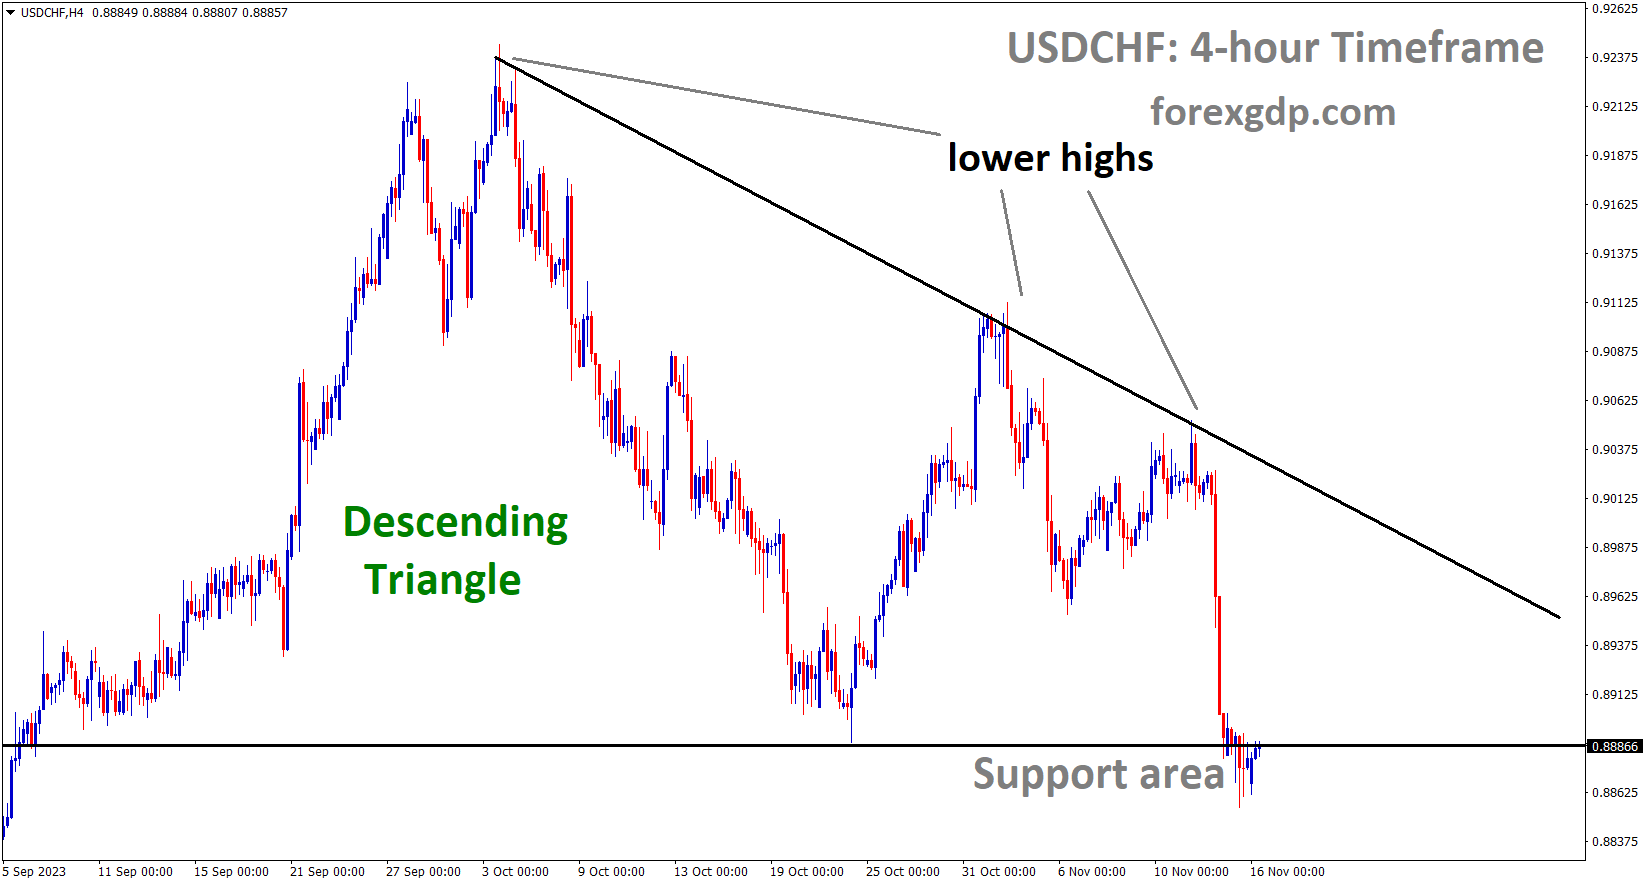 USDCHF is moving in the Descending triangle pattern and the market has reached the support area of the pattern